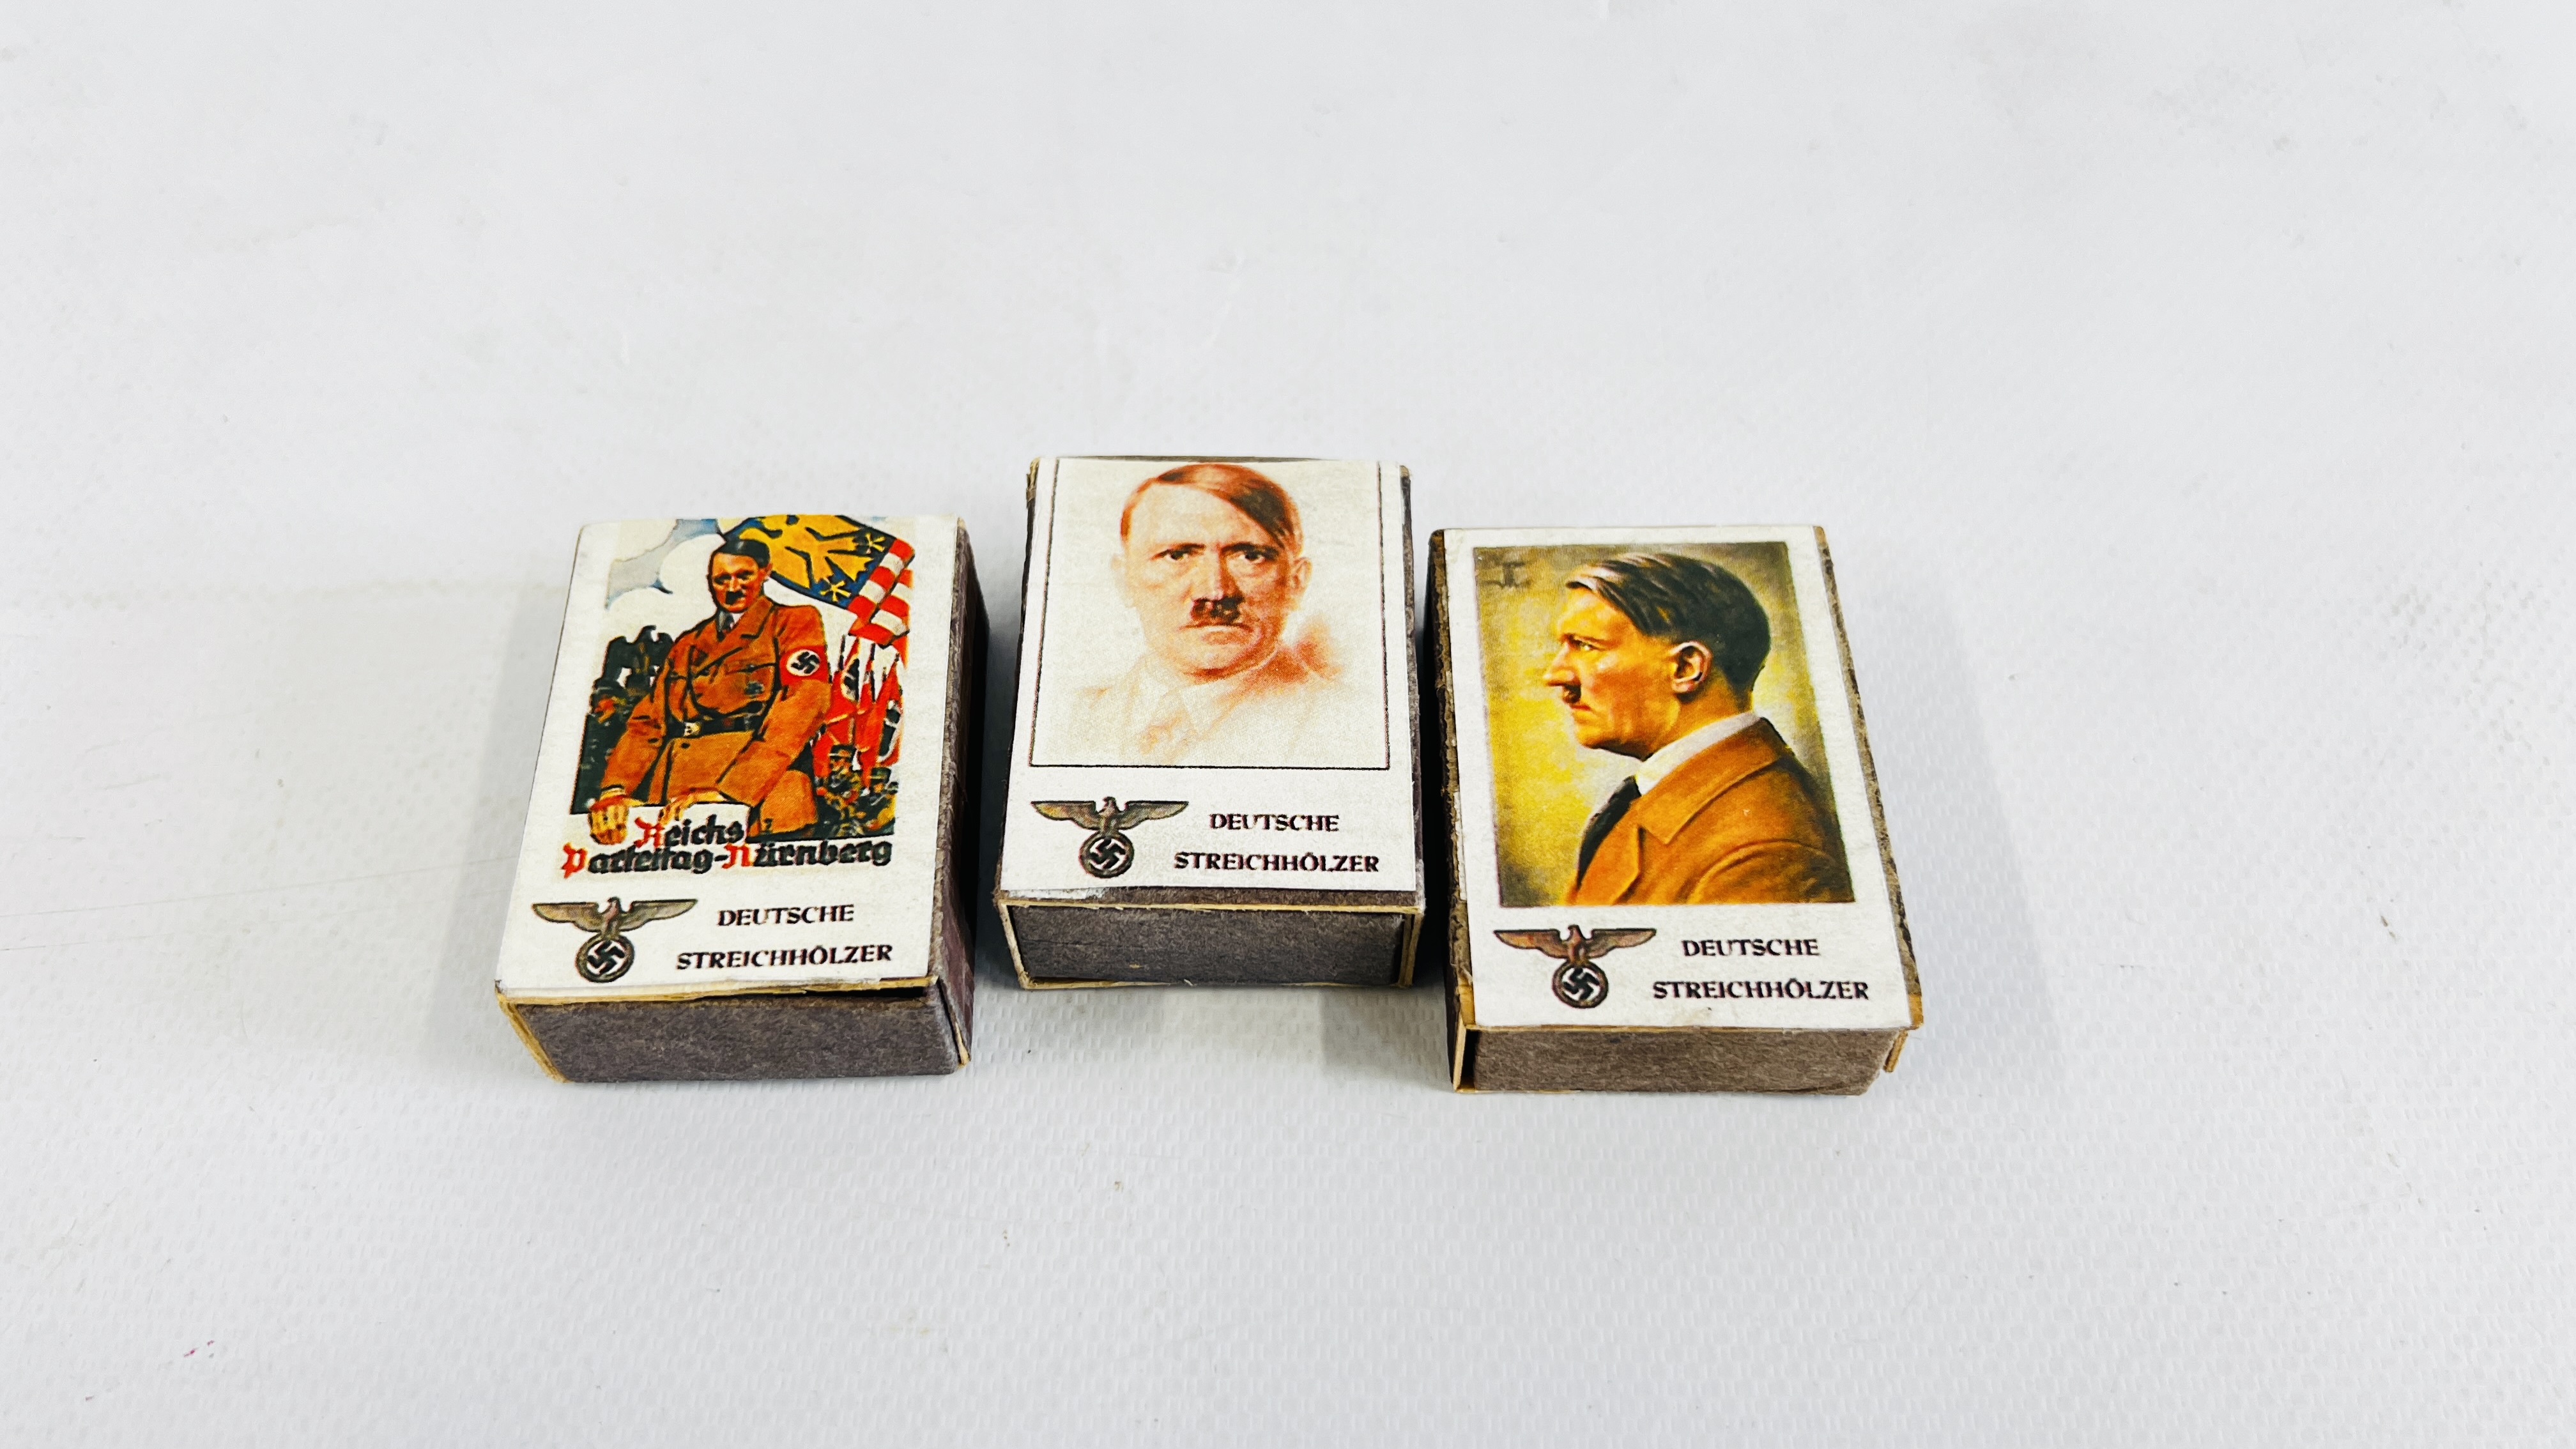 A GROUP THREE MATCHBOXES DEPICTING AN IMAGE OF "HITLER".